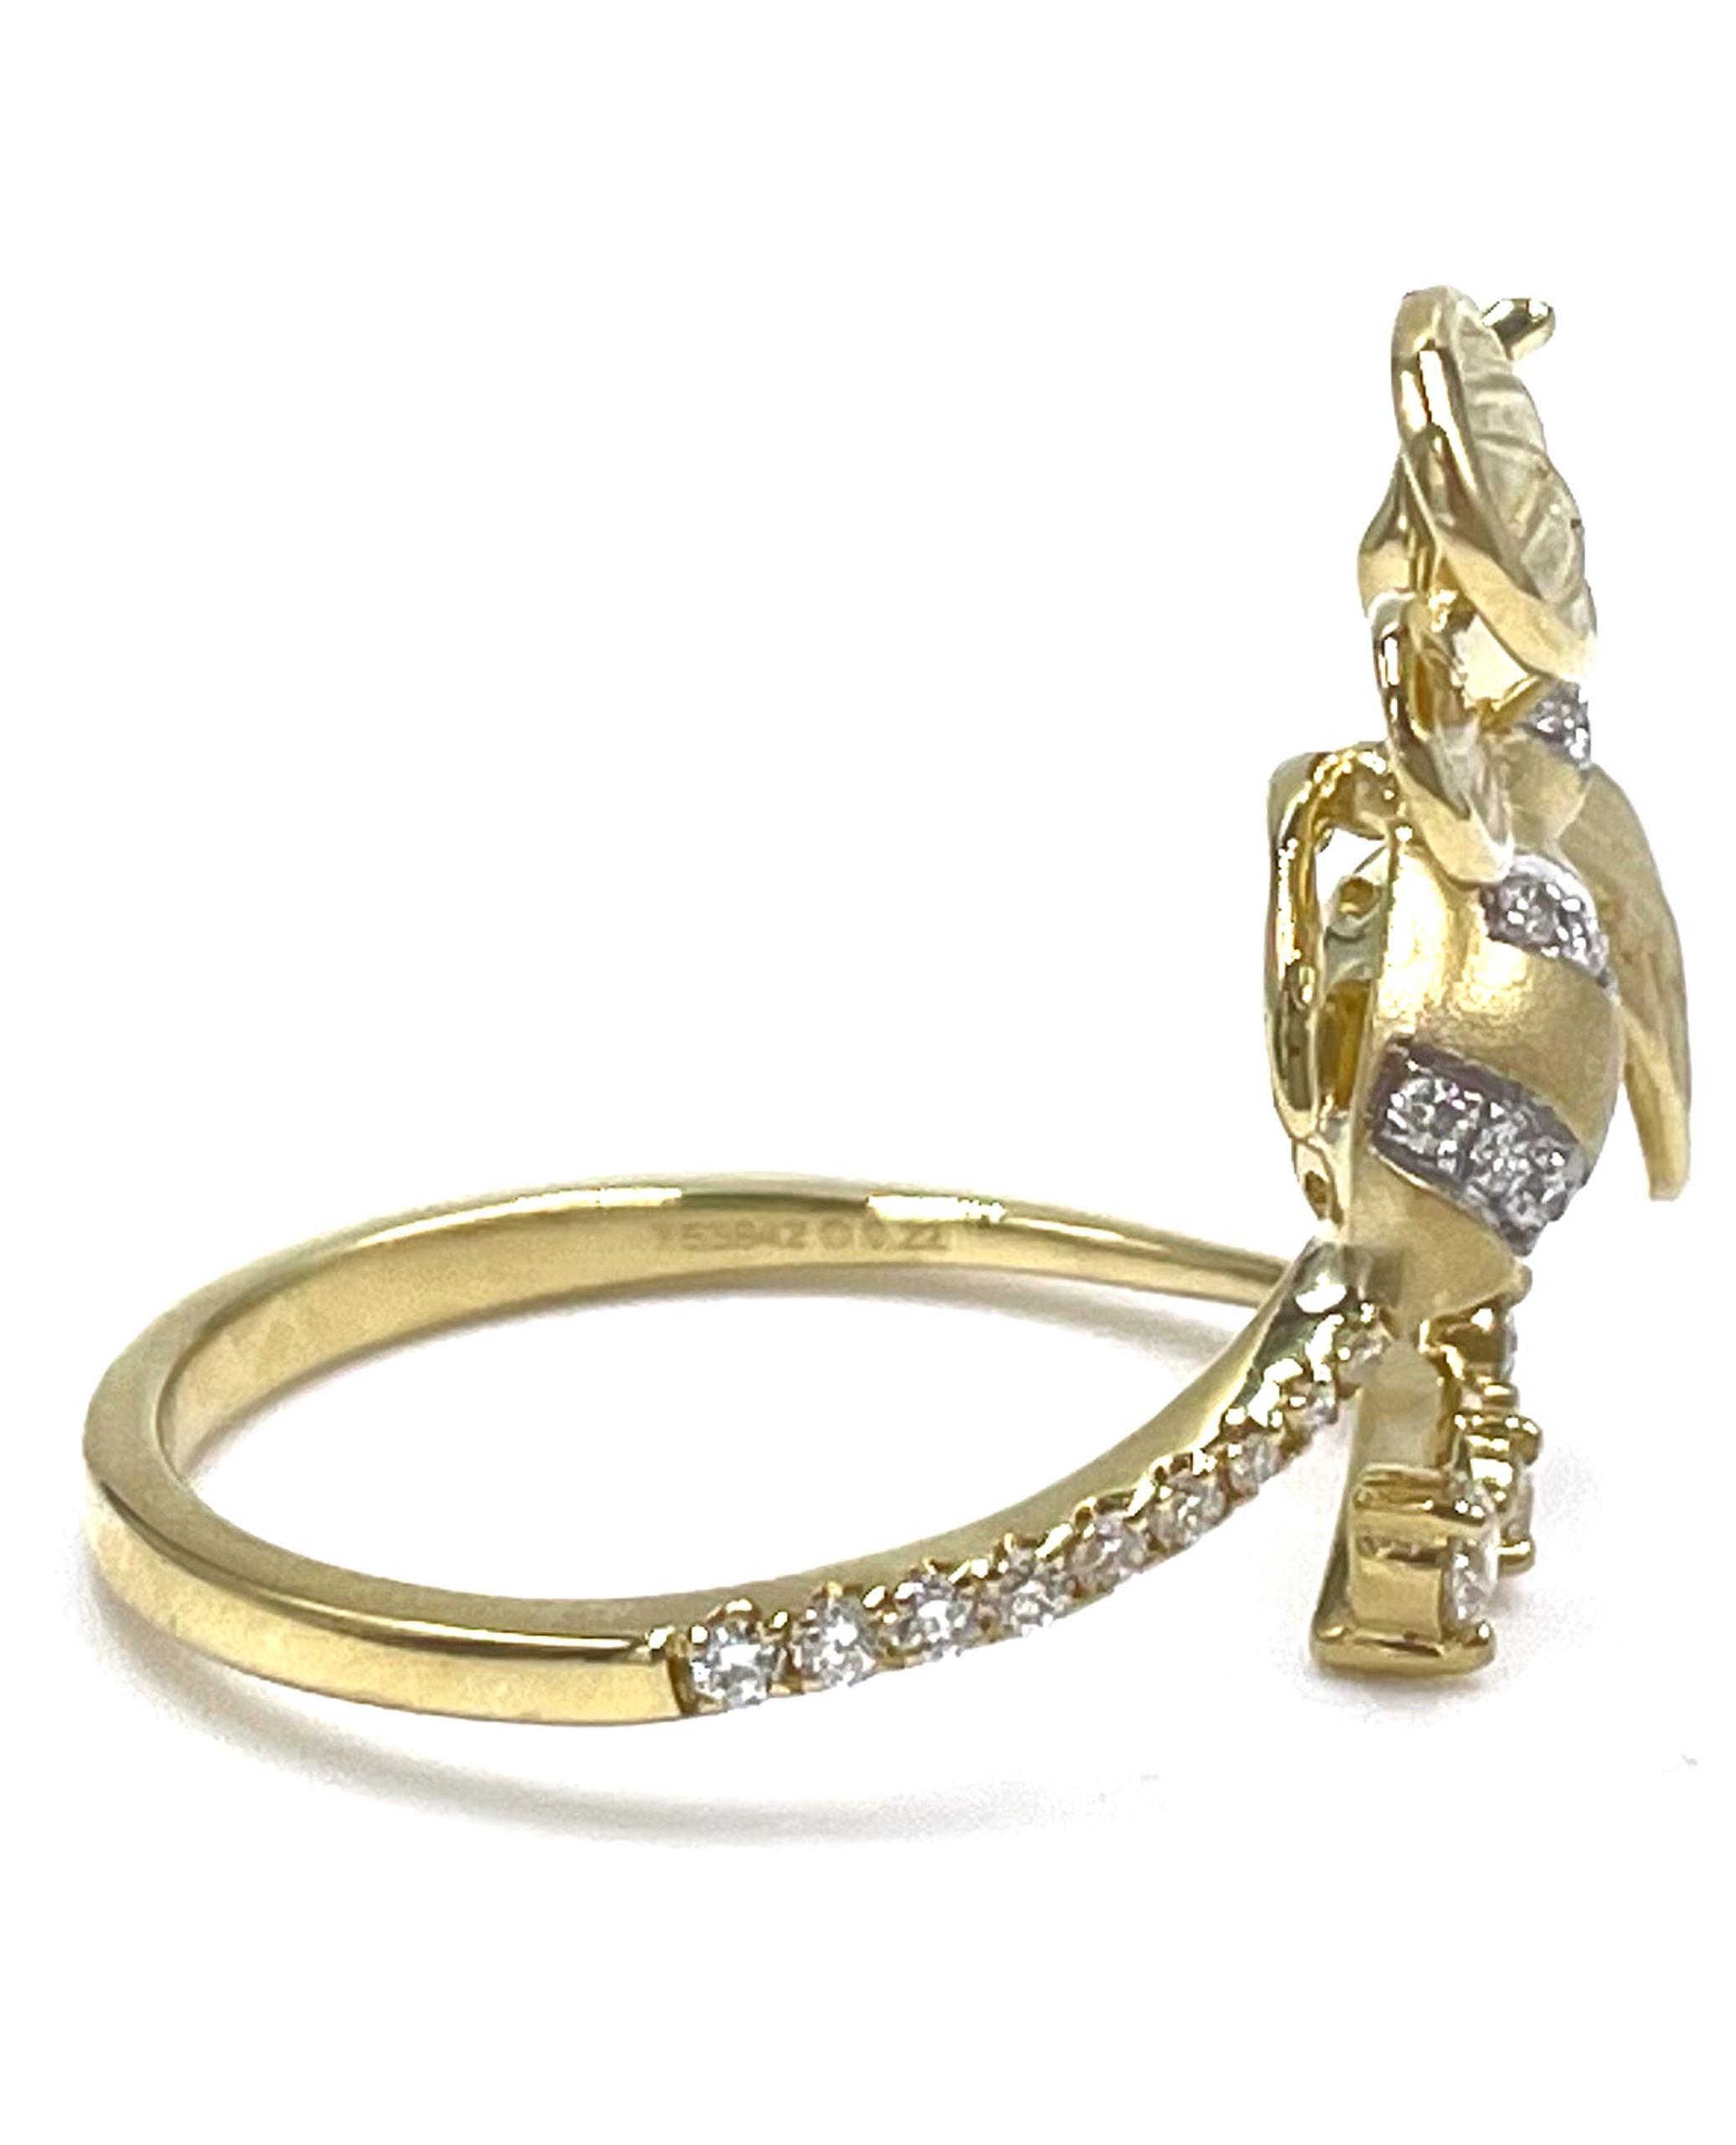 Contemporary 18K Yellow Gold Queen Bee Wrap Ring by Simon G. - DR380 For Sale